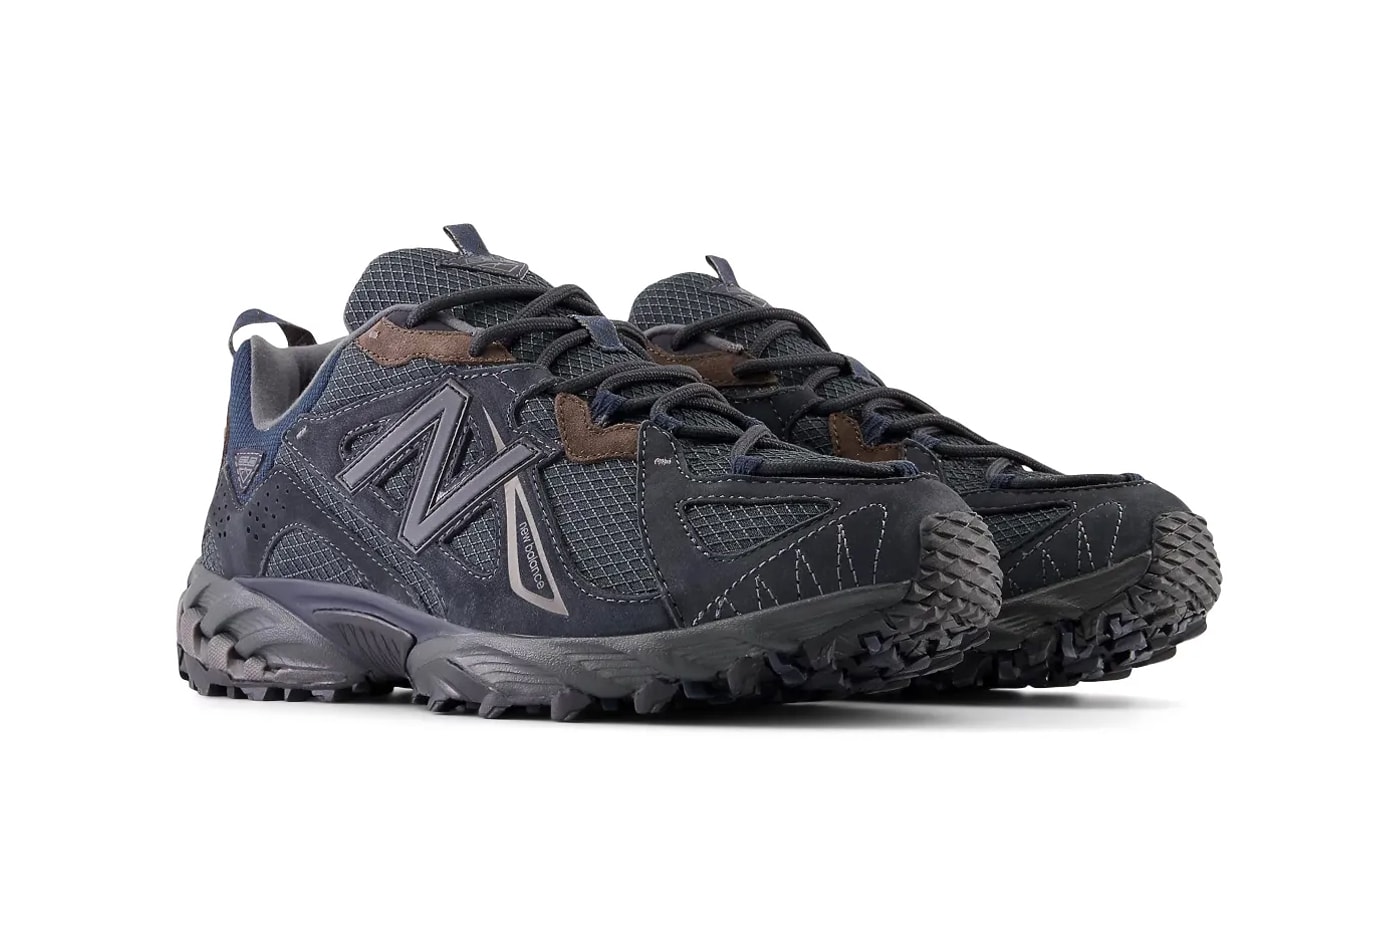 Official Look at the New Balance 610T "Phantom" ml610tp-4 trail running shoe sneaker